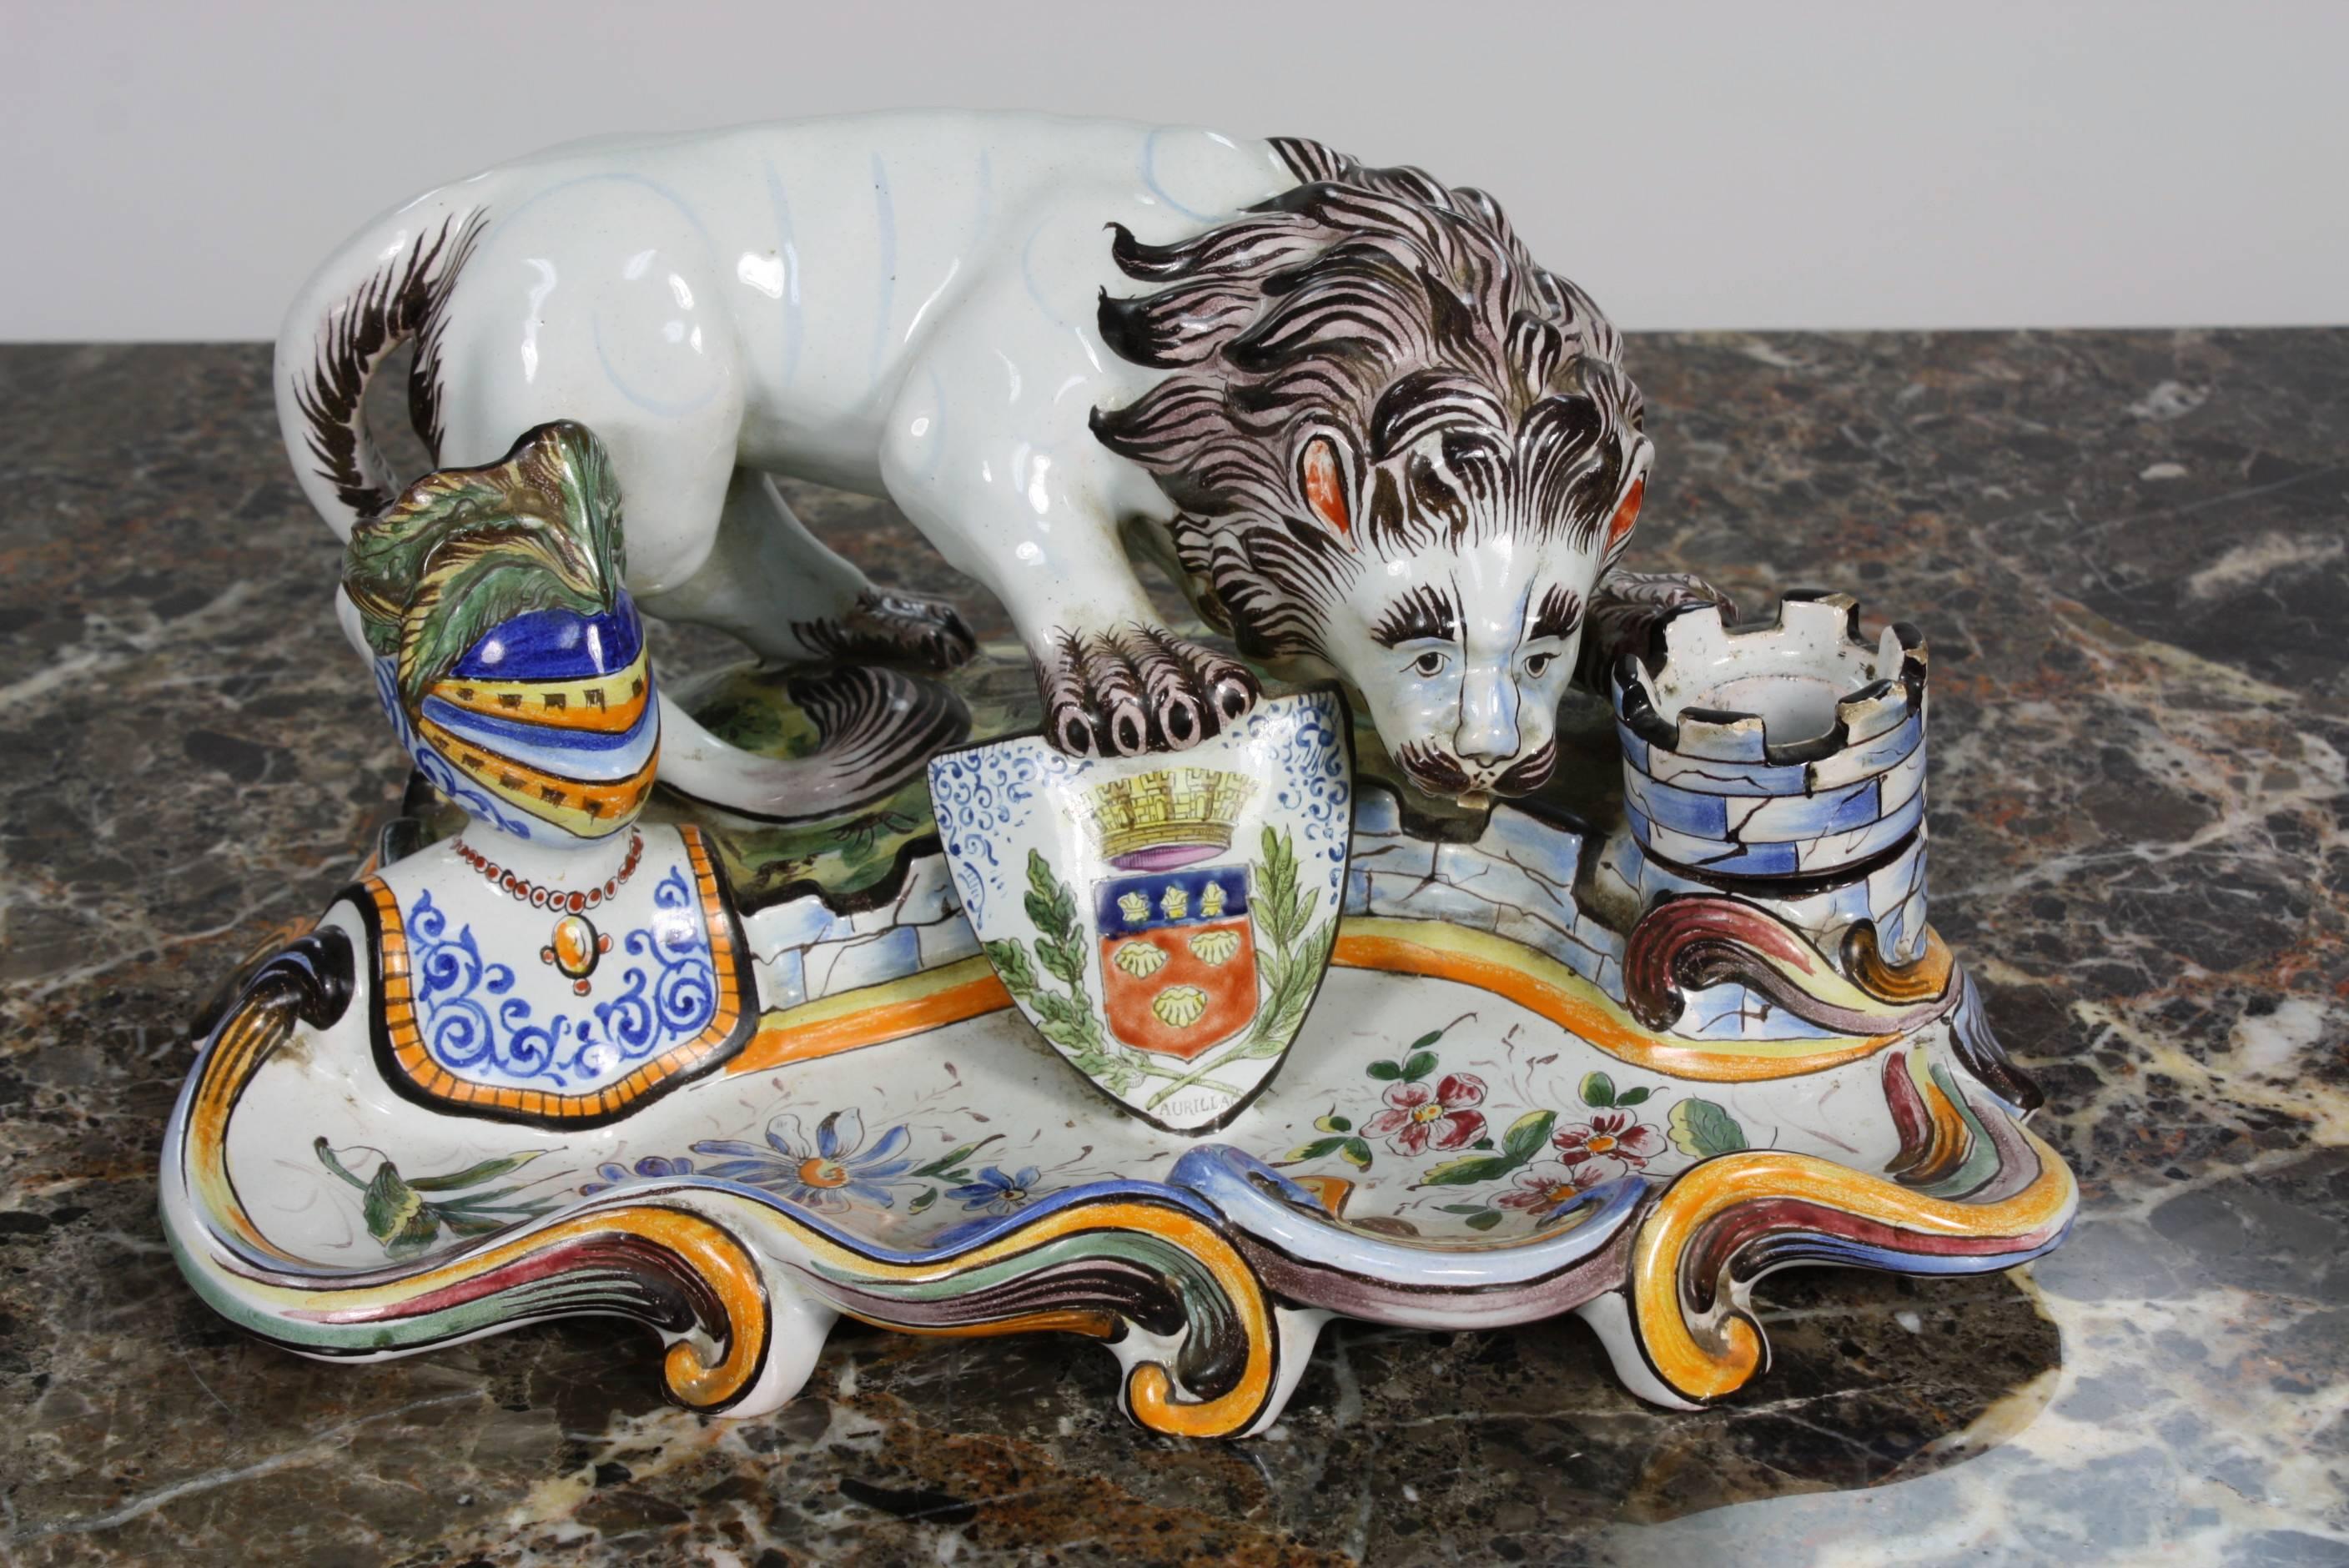 An unusual and highly-decorative 19th century French faience inkwell from Normandy, featuring a stylized lion holding a shield with coat of arms, surrounded by a helmet (hollow for holding pens), and a removable castle inkwell. Underneath marked and